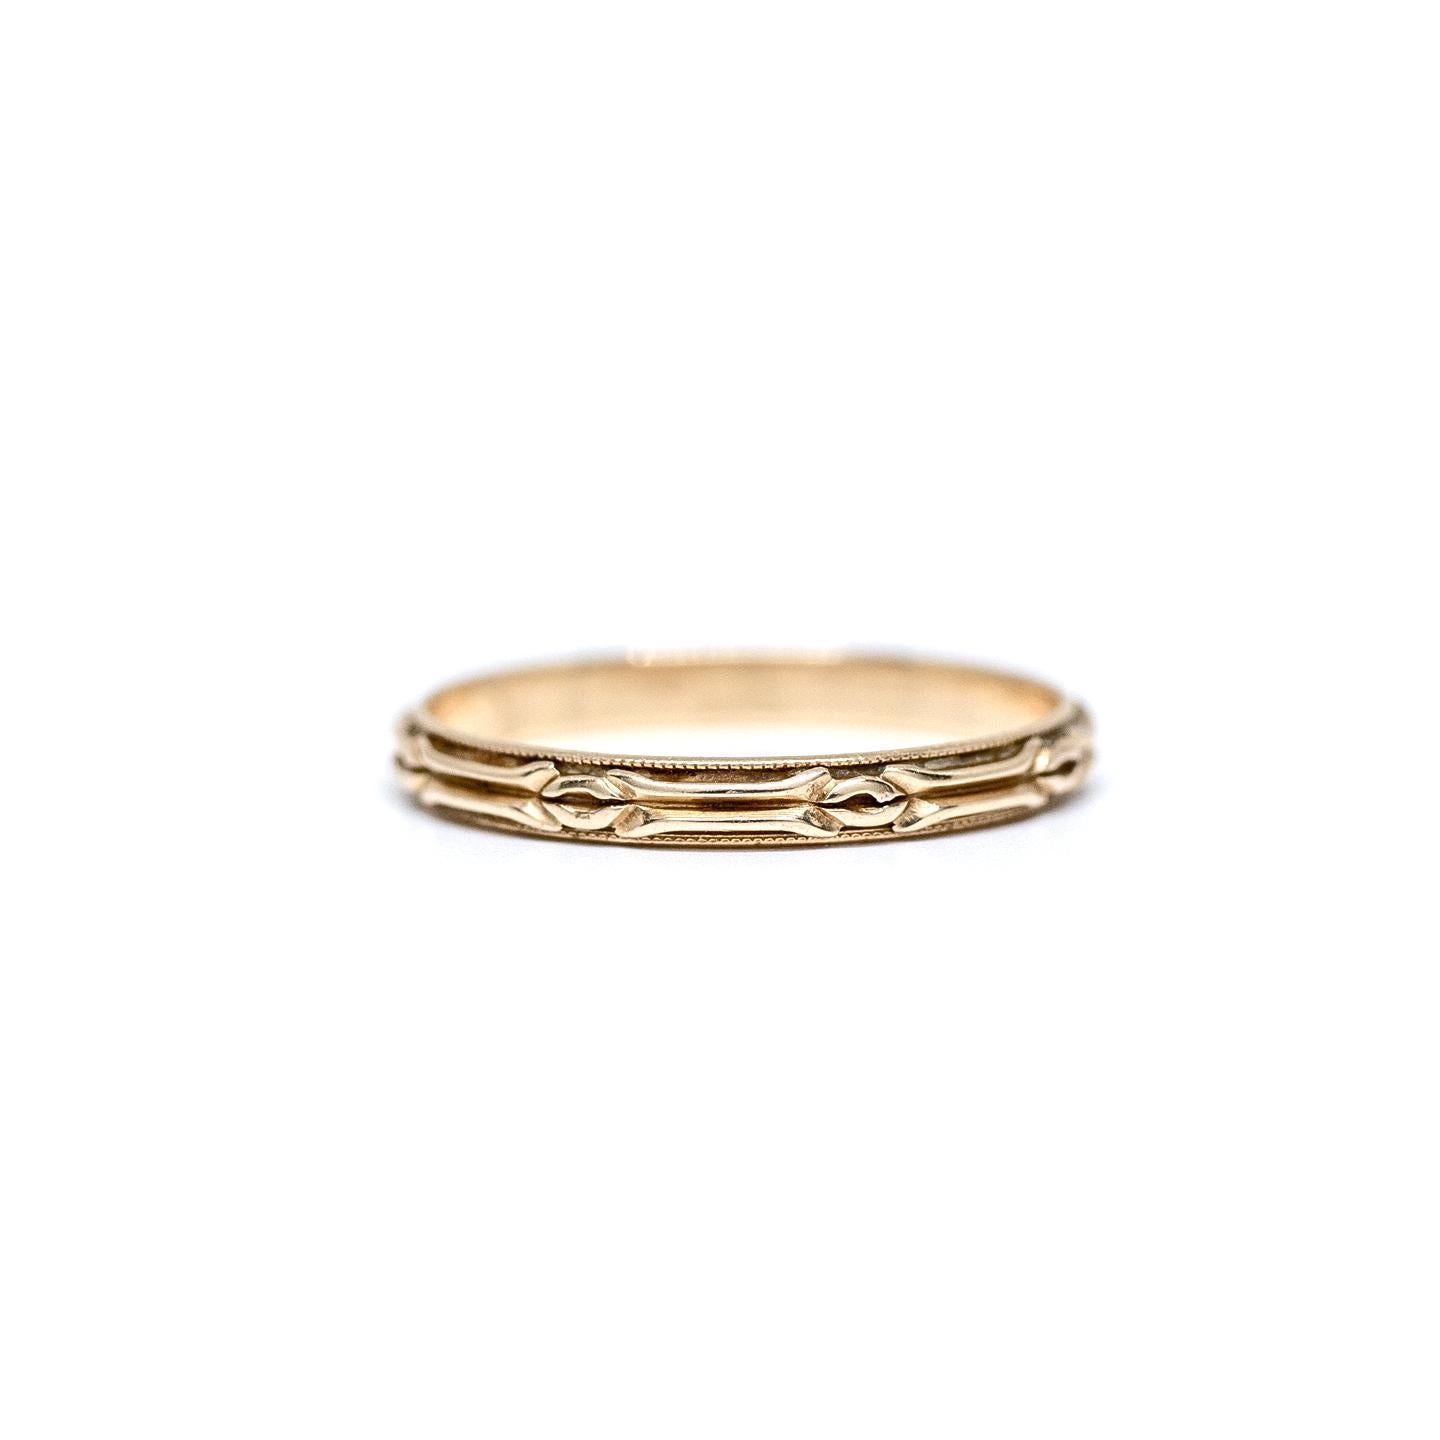 Here we have a genuine Art Deco wedding band crafted in 14 karat yellow gold! These yellow gold vintage bands are tougher to find and this one is in great condition! This beautiful ring makes for a great band to pair with your vintage engagement